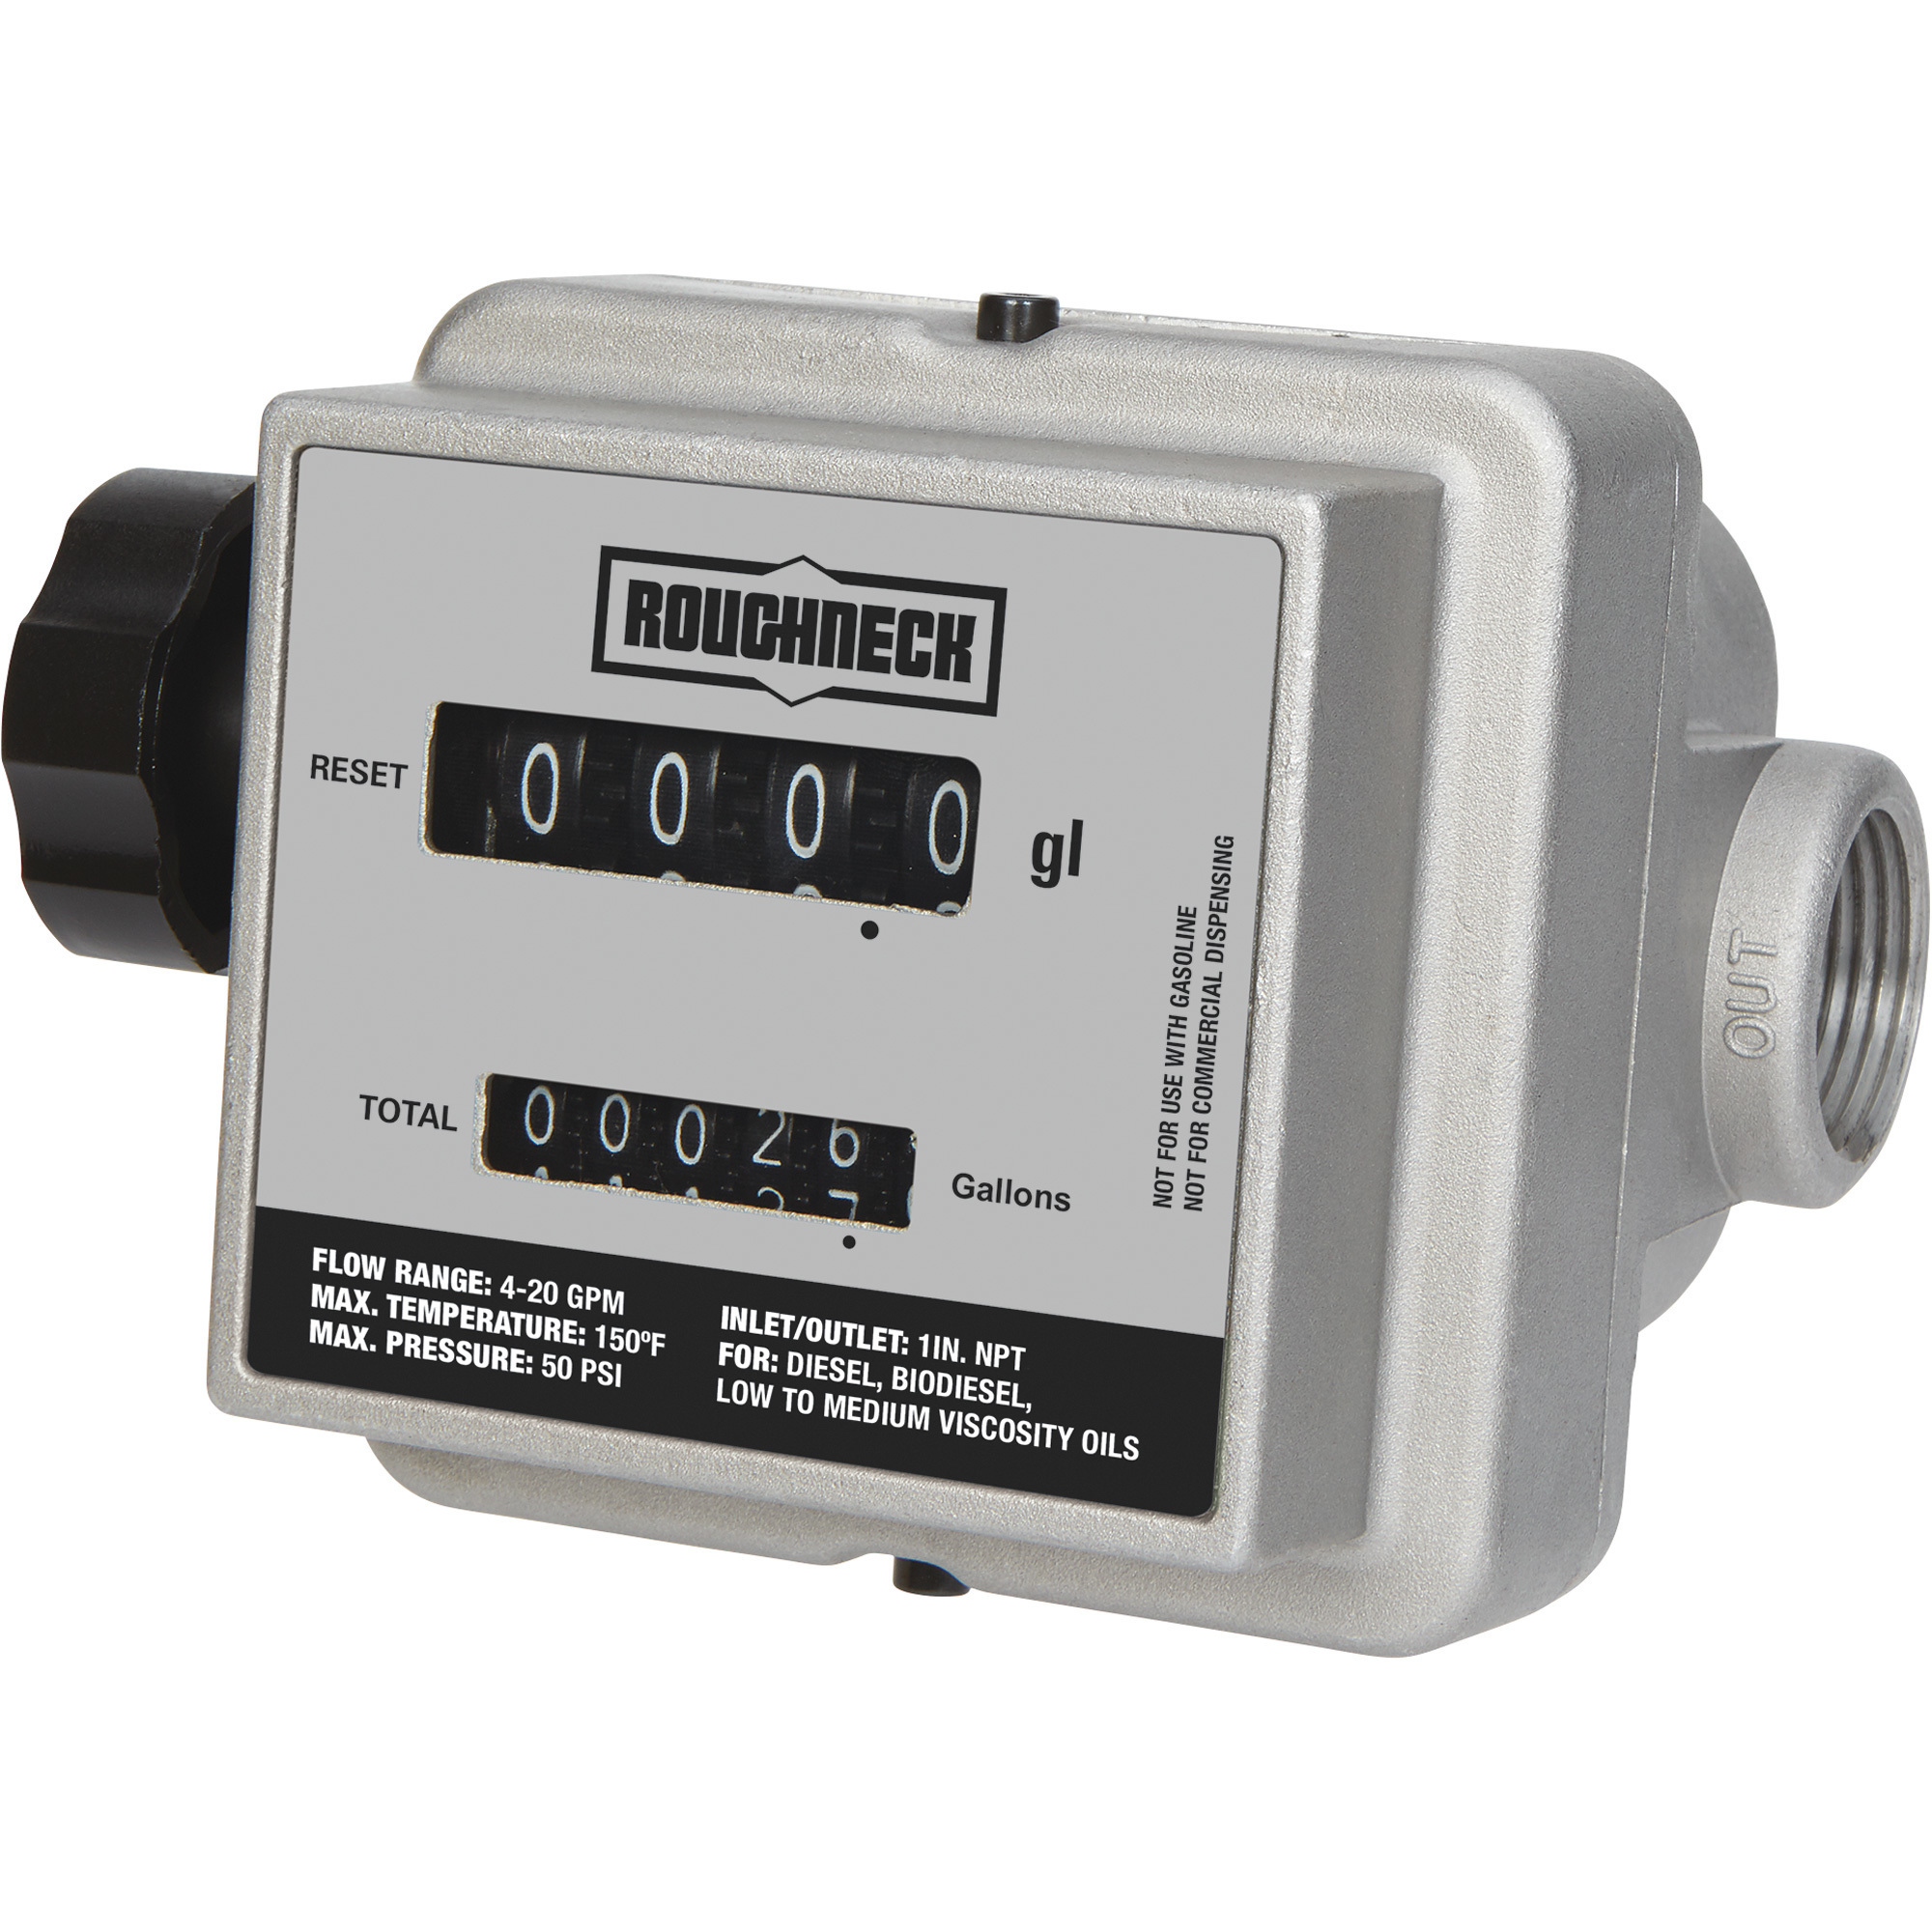 Roughneck Mechanical Fuel Meter, 4-20 GPM, 1Inch Inlet/Outlet